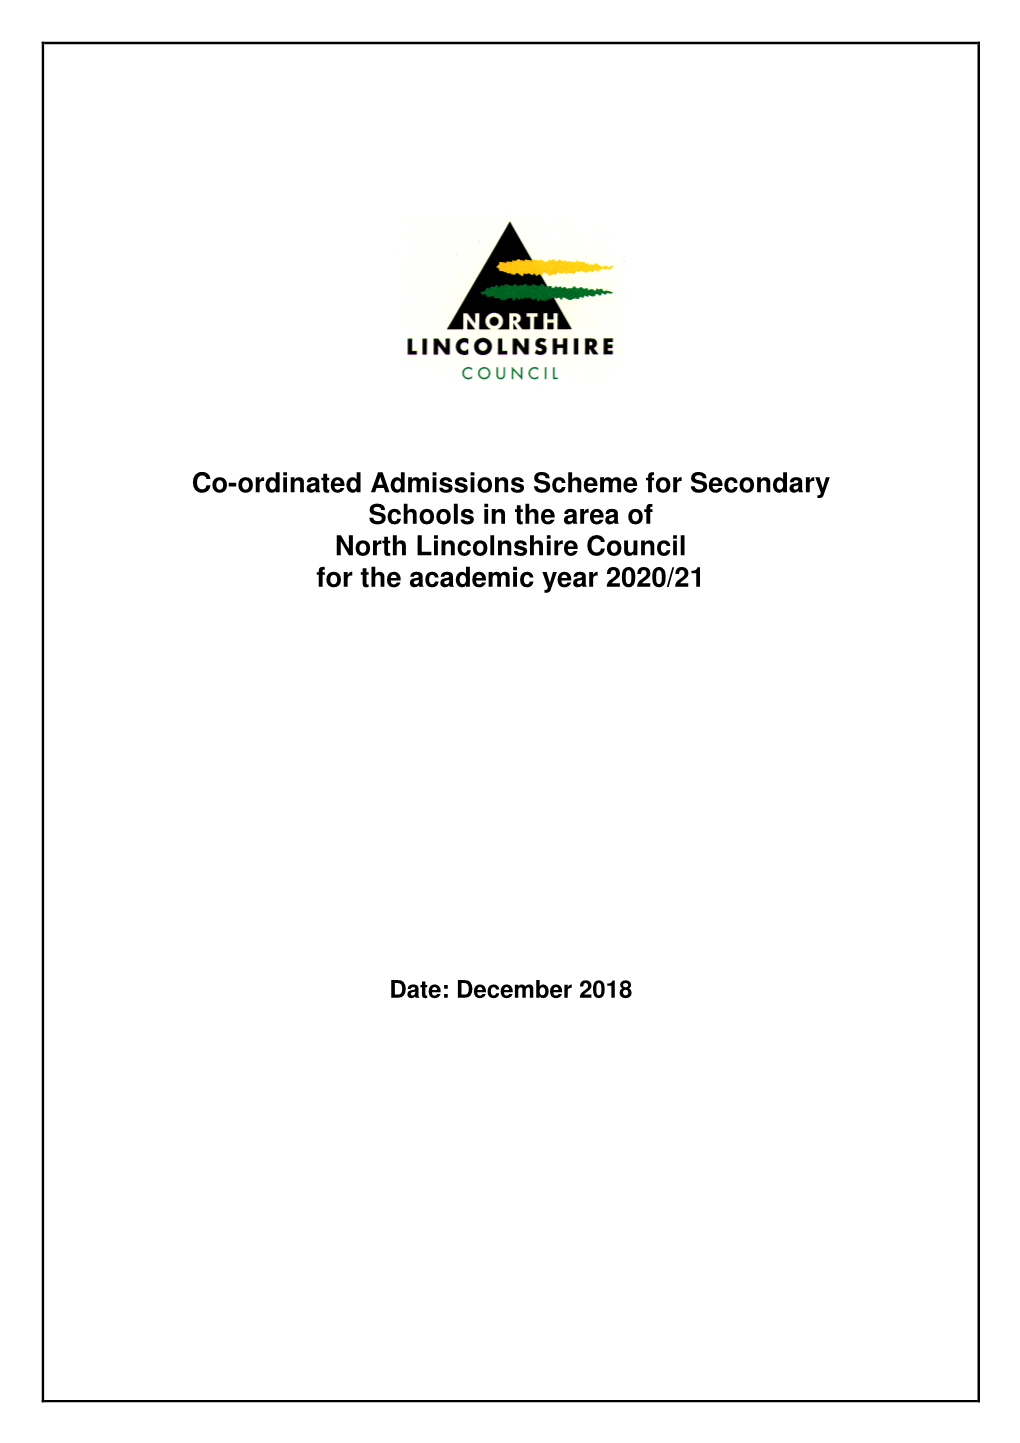 Co-Ordinated Admissions Scheme for Secondary Schools in the Area of North Lincolnshire Council for the Academic Year 2020/21